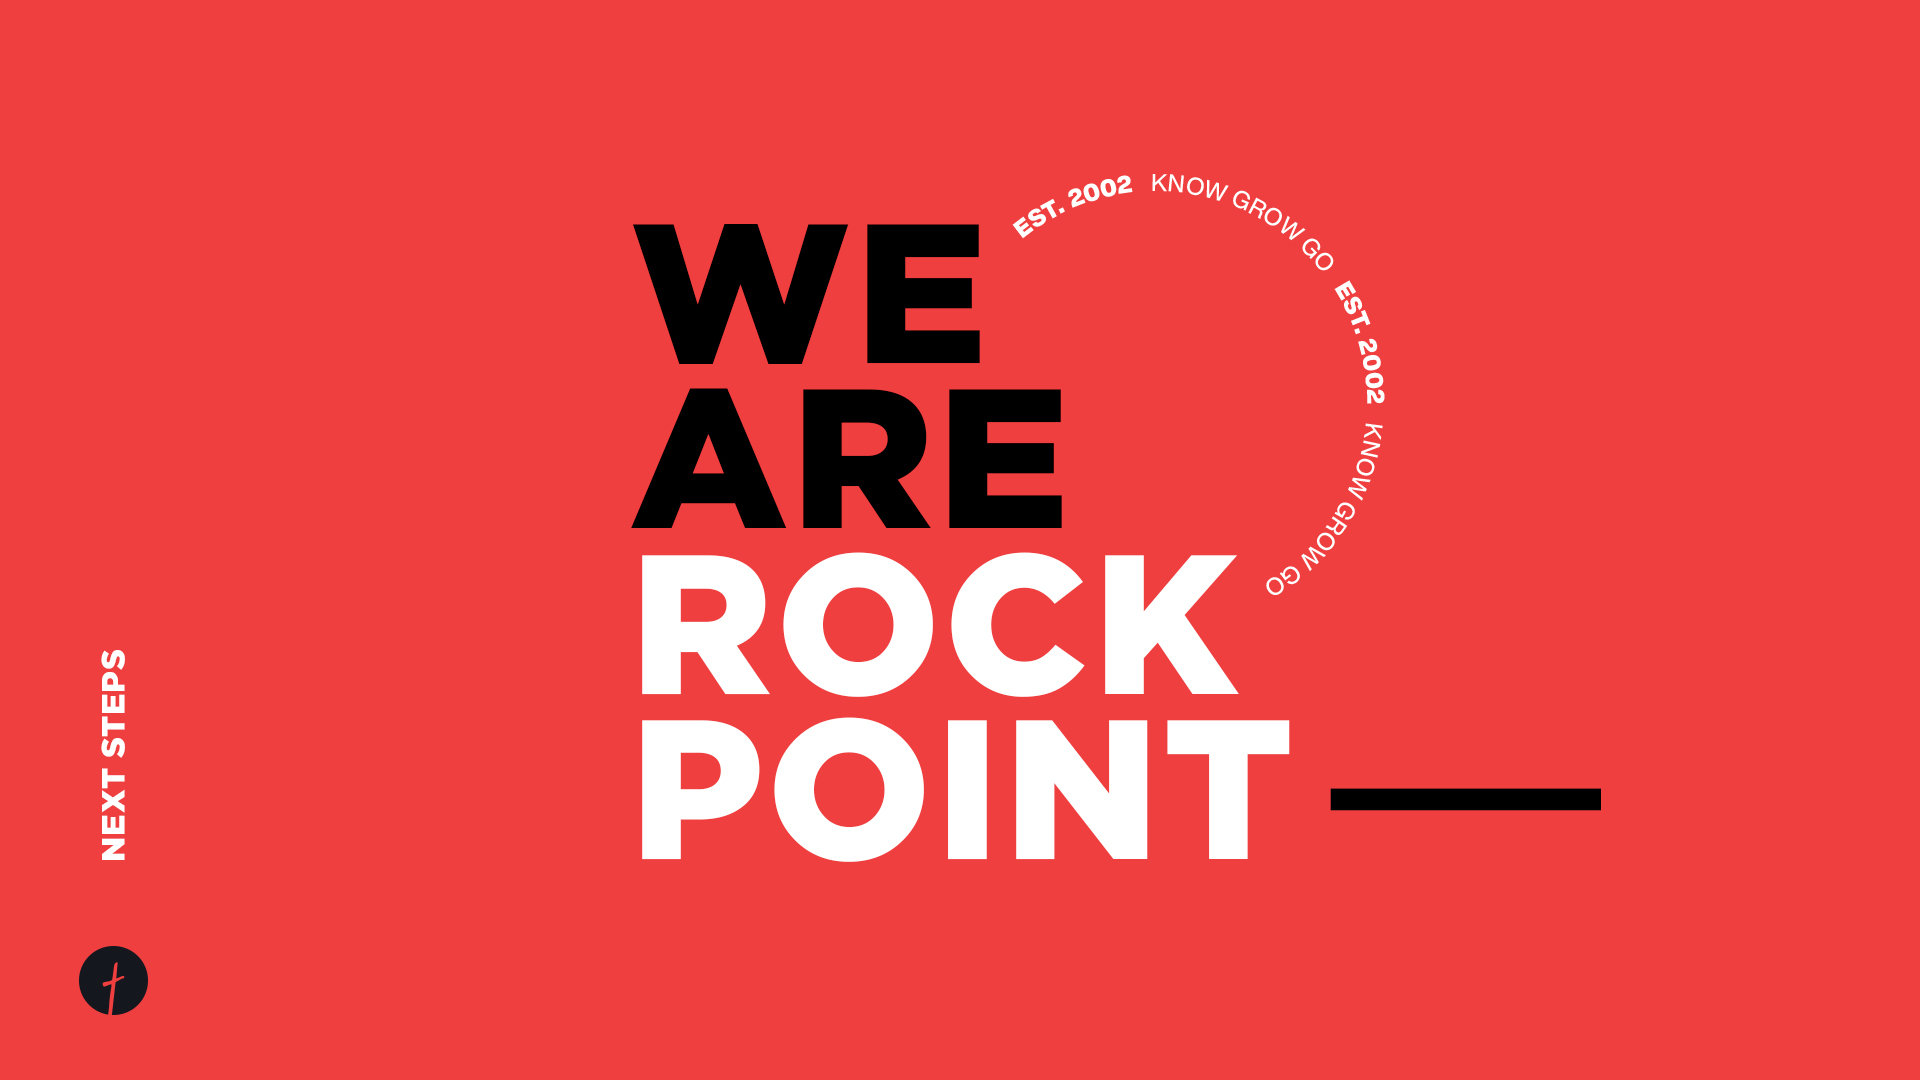 WE ARE ROCK POINT